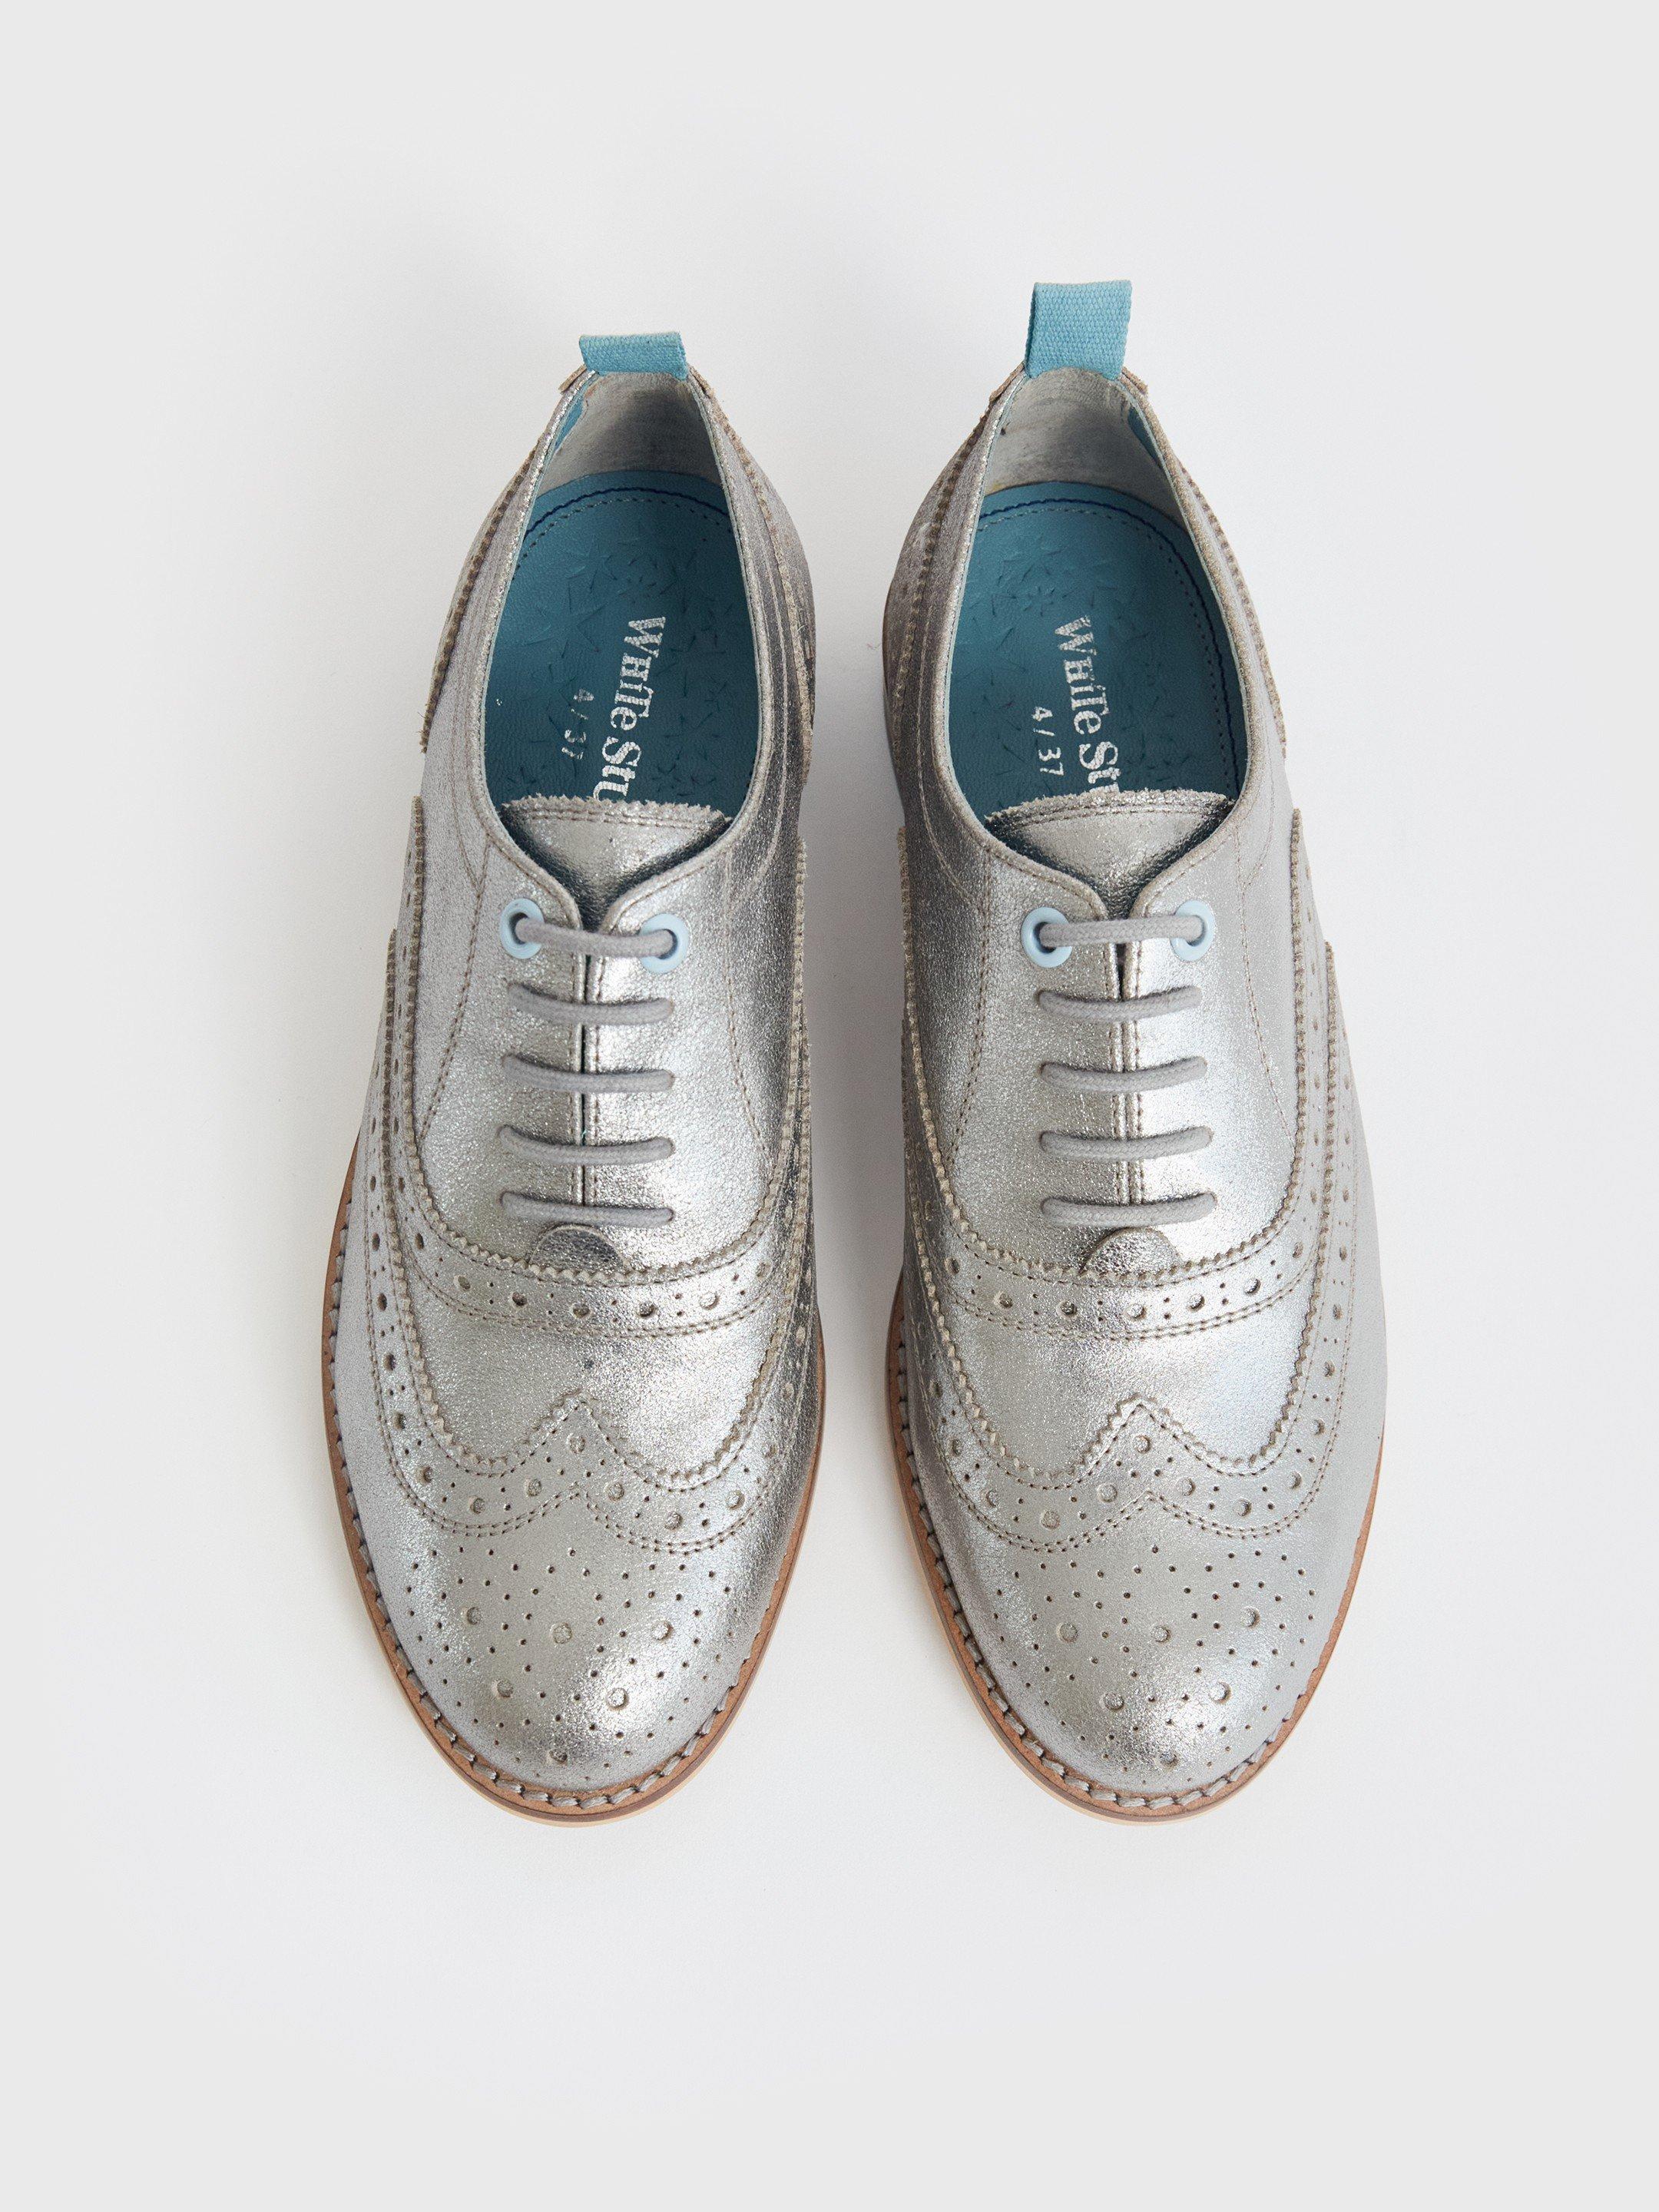 Thistle Lace Up Brogue in SLV TN MET - FLAT DETAIL